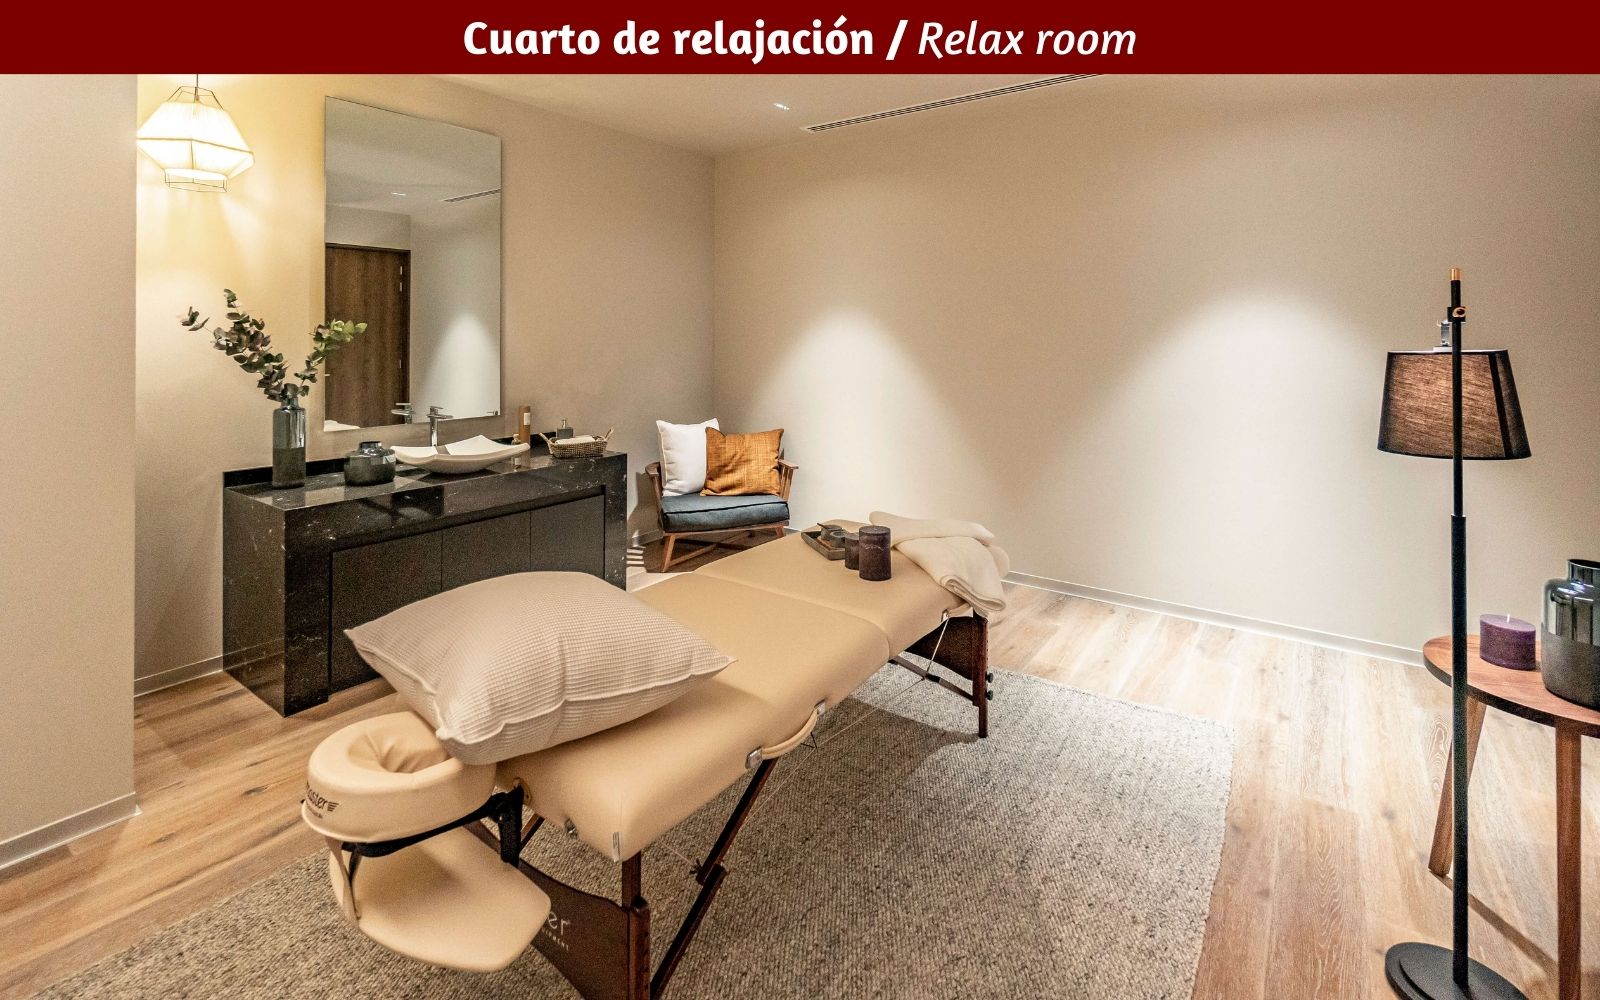 Apartment with pool, Gym, Cuauhtemoc, for sale, Mexico City